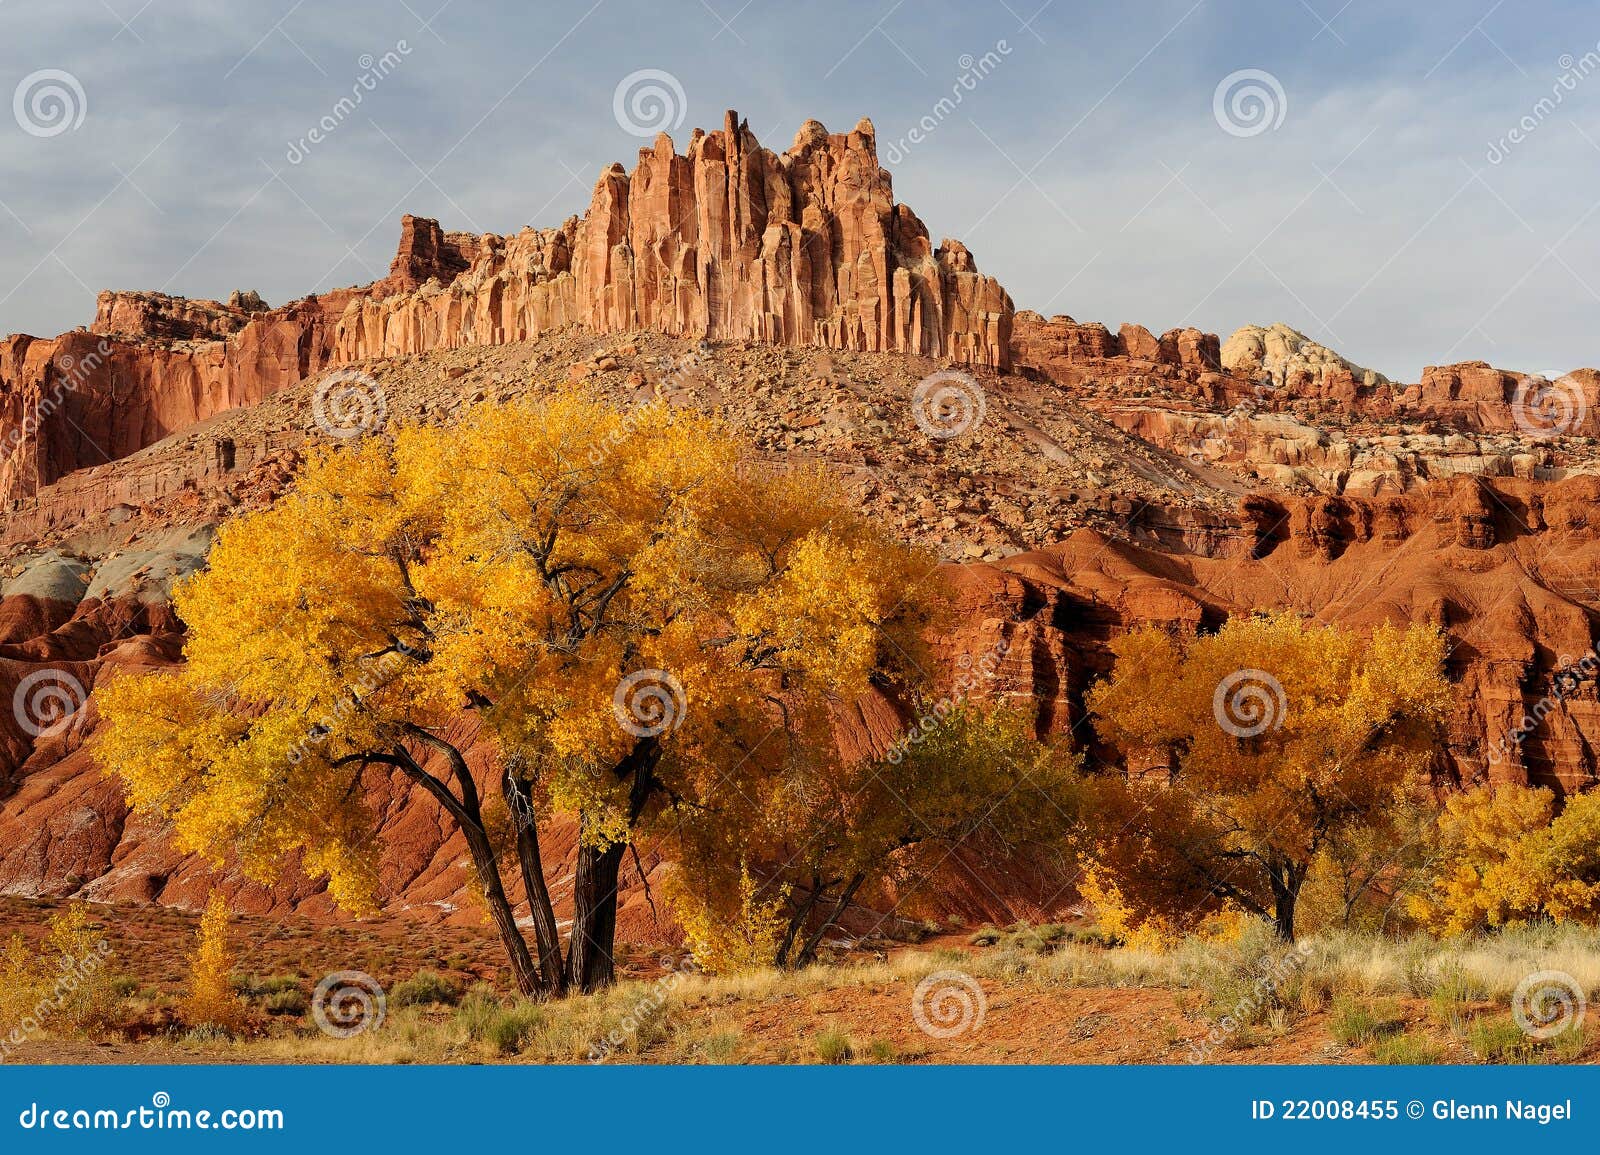 autumn at the capitol reef